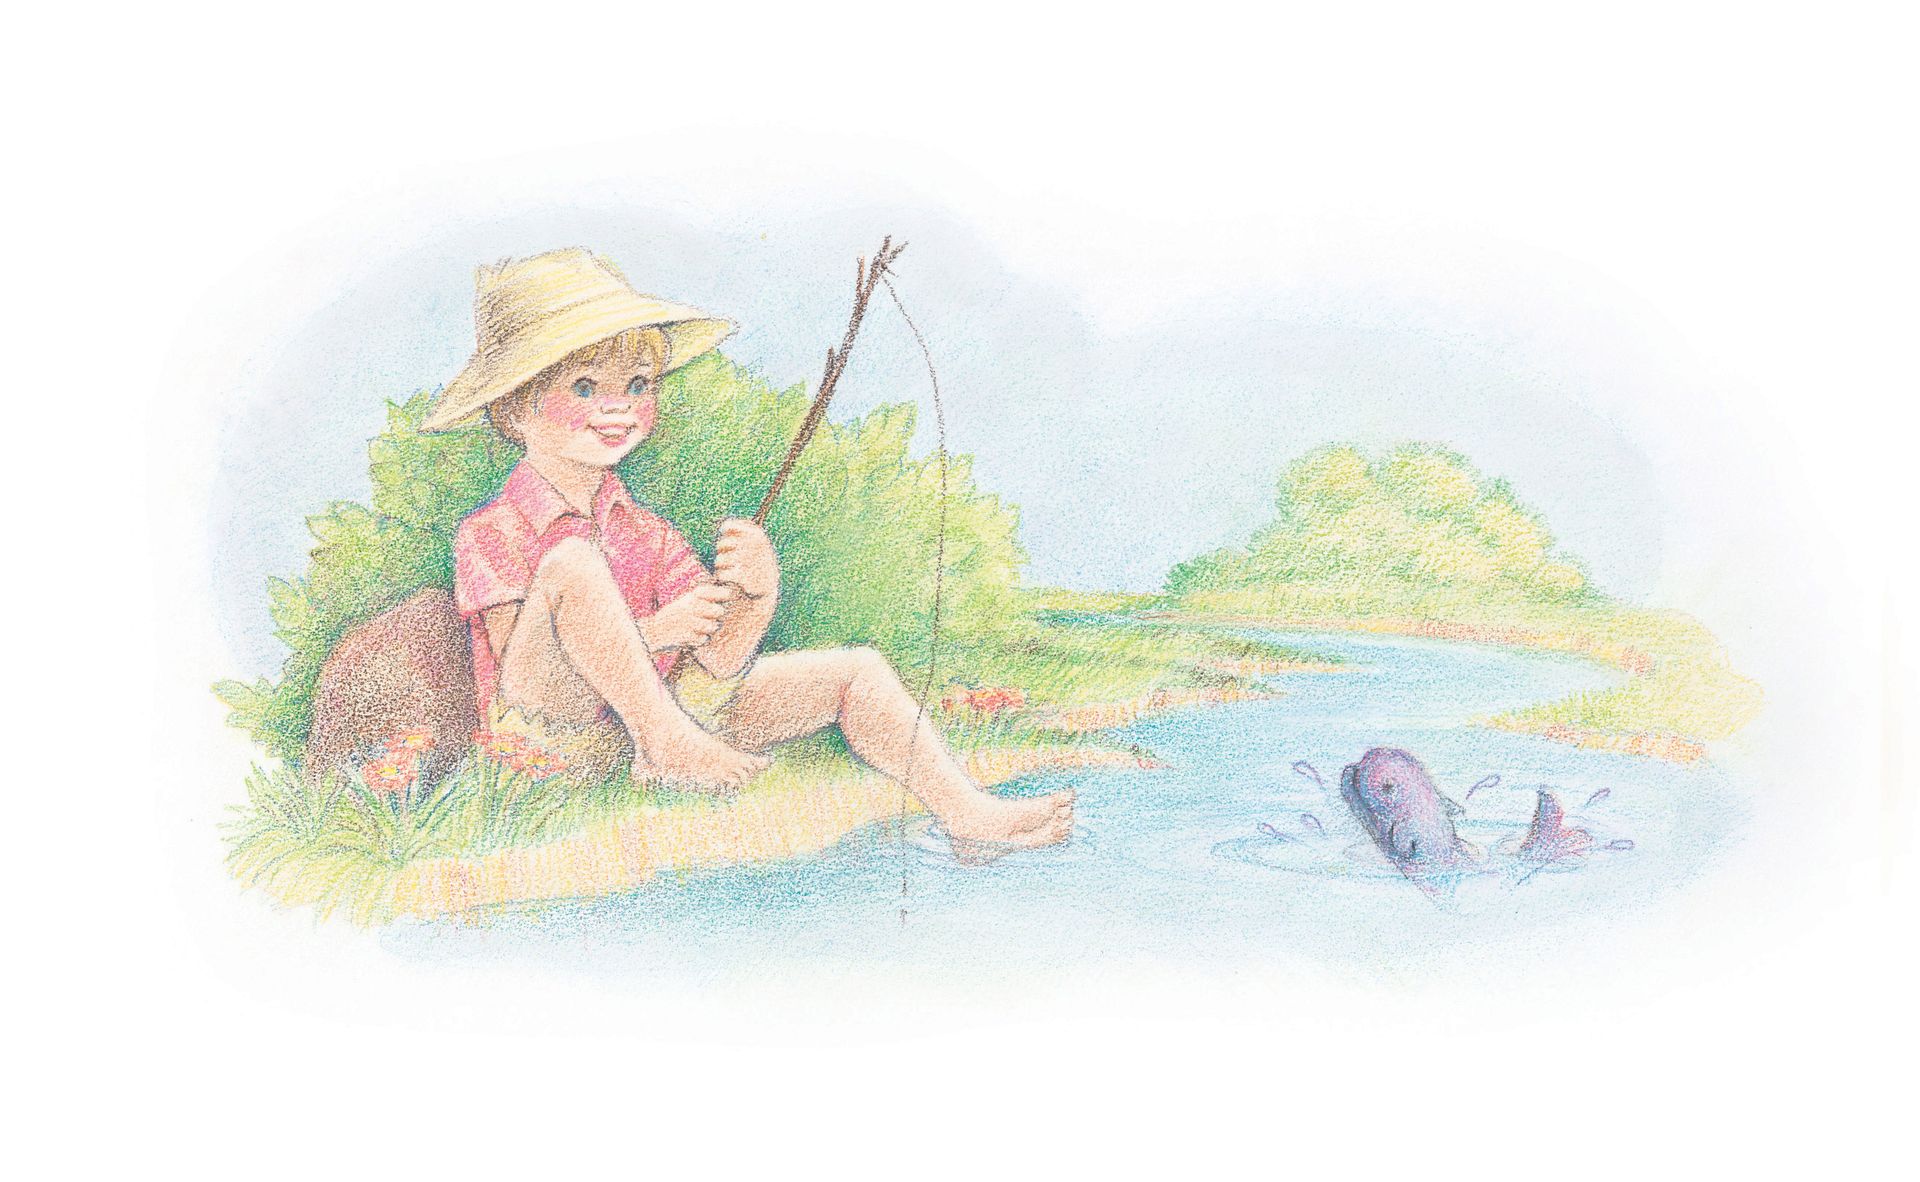 A boy in a large hat, sitting and fishing in a stream. From the Children’s Songbook, page 232, “Beauty Everywhere”; watercolor illustration by Virginia Sargent.